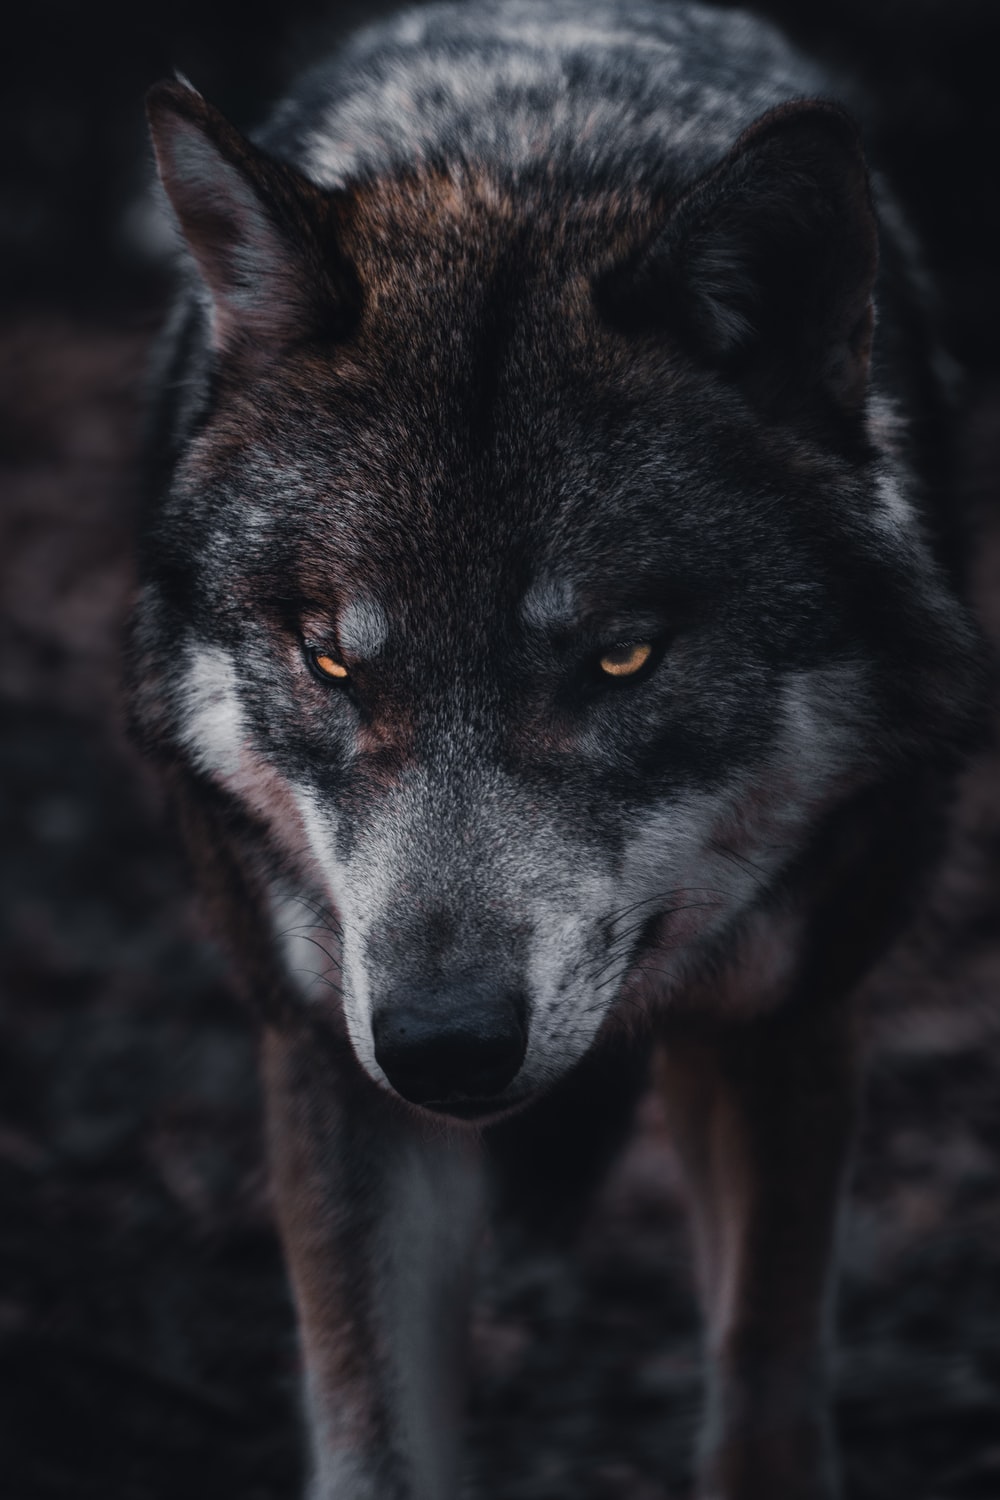 Wolf Phone Wallpapers